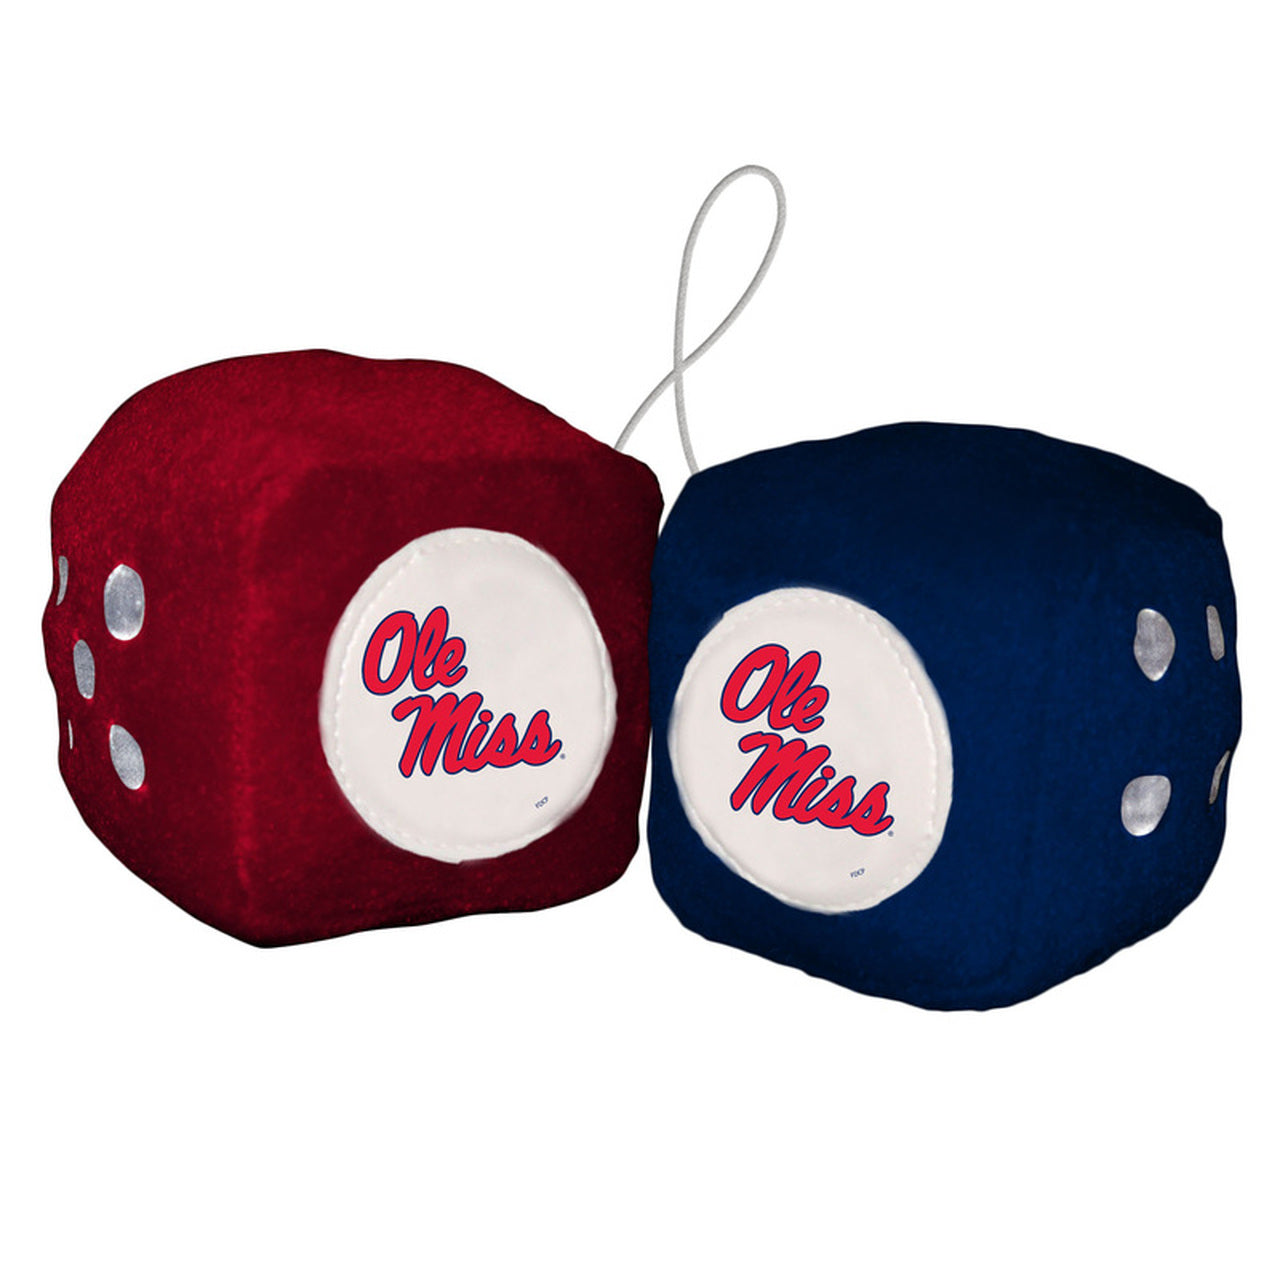 Ole Miss Rebels NCAA Fuzzy Dice - 3" plush hanging dice, team colors/logo. Official NCAA licensed. Ideal for car, office, or as a sports fan gift!